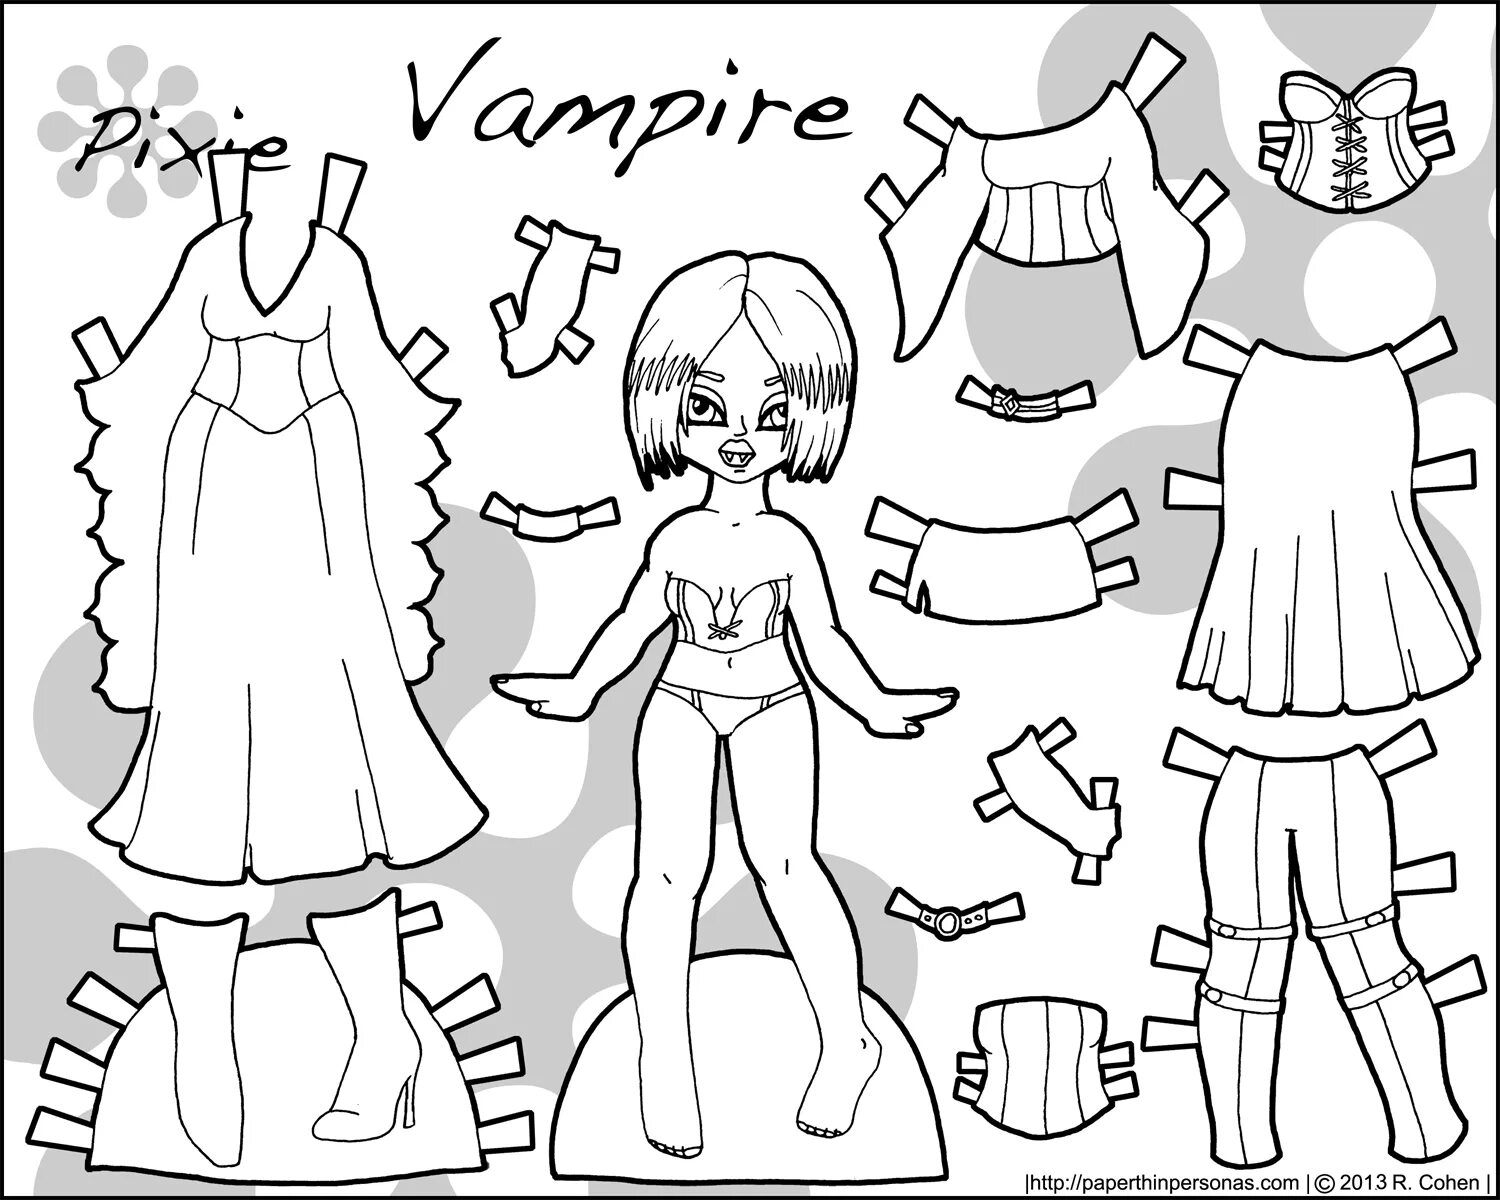 Paper lol doll with cut out clothes black and white #6